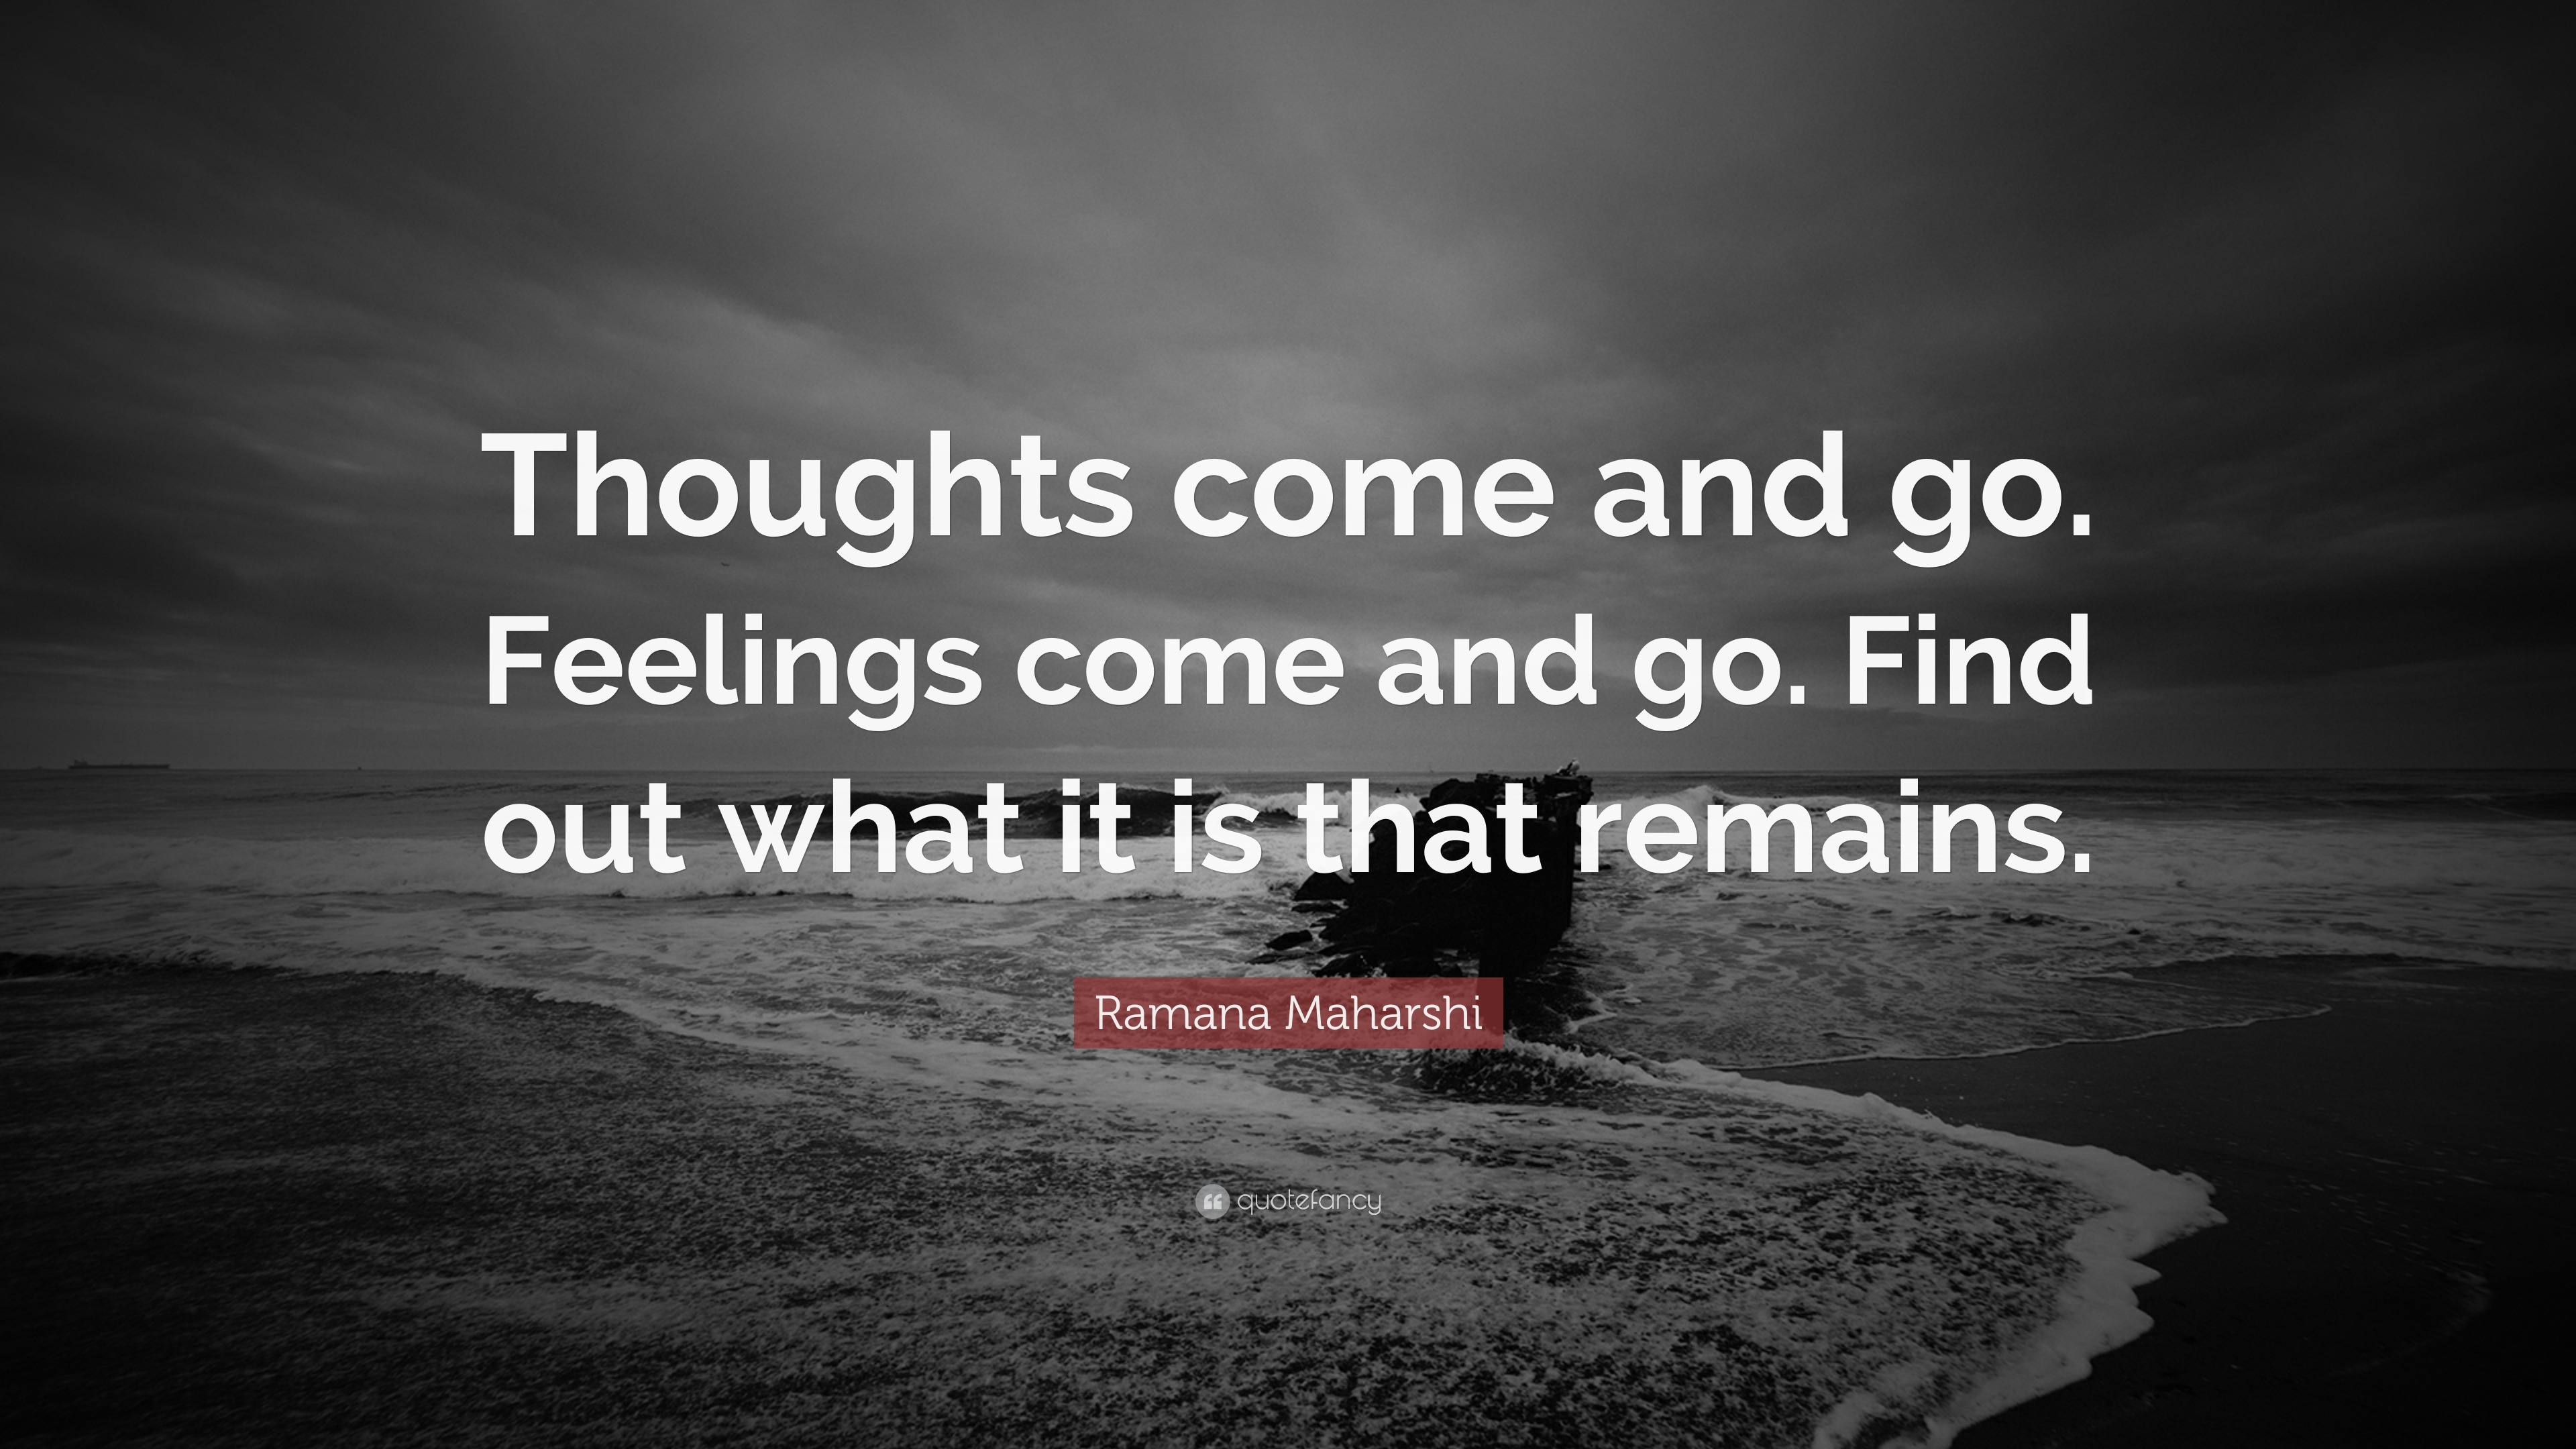 Ramana Maharshi Quote: “Thoughts come and go. Feelings come and go ...